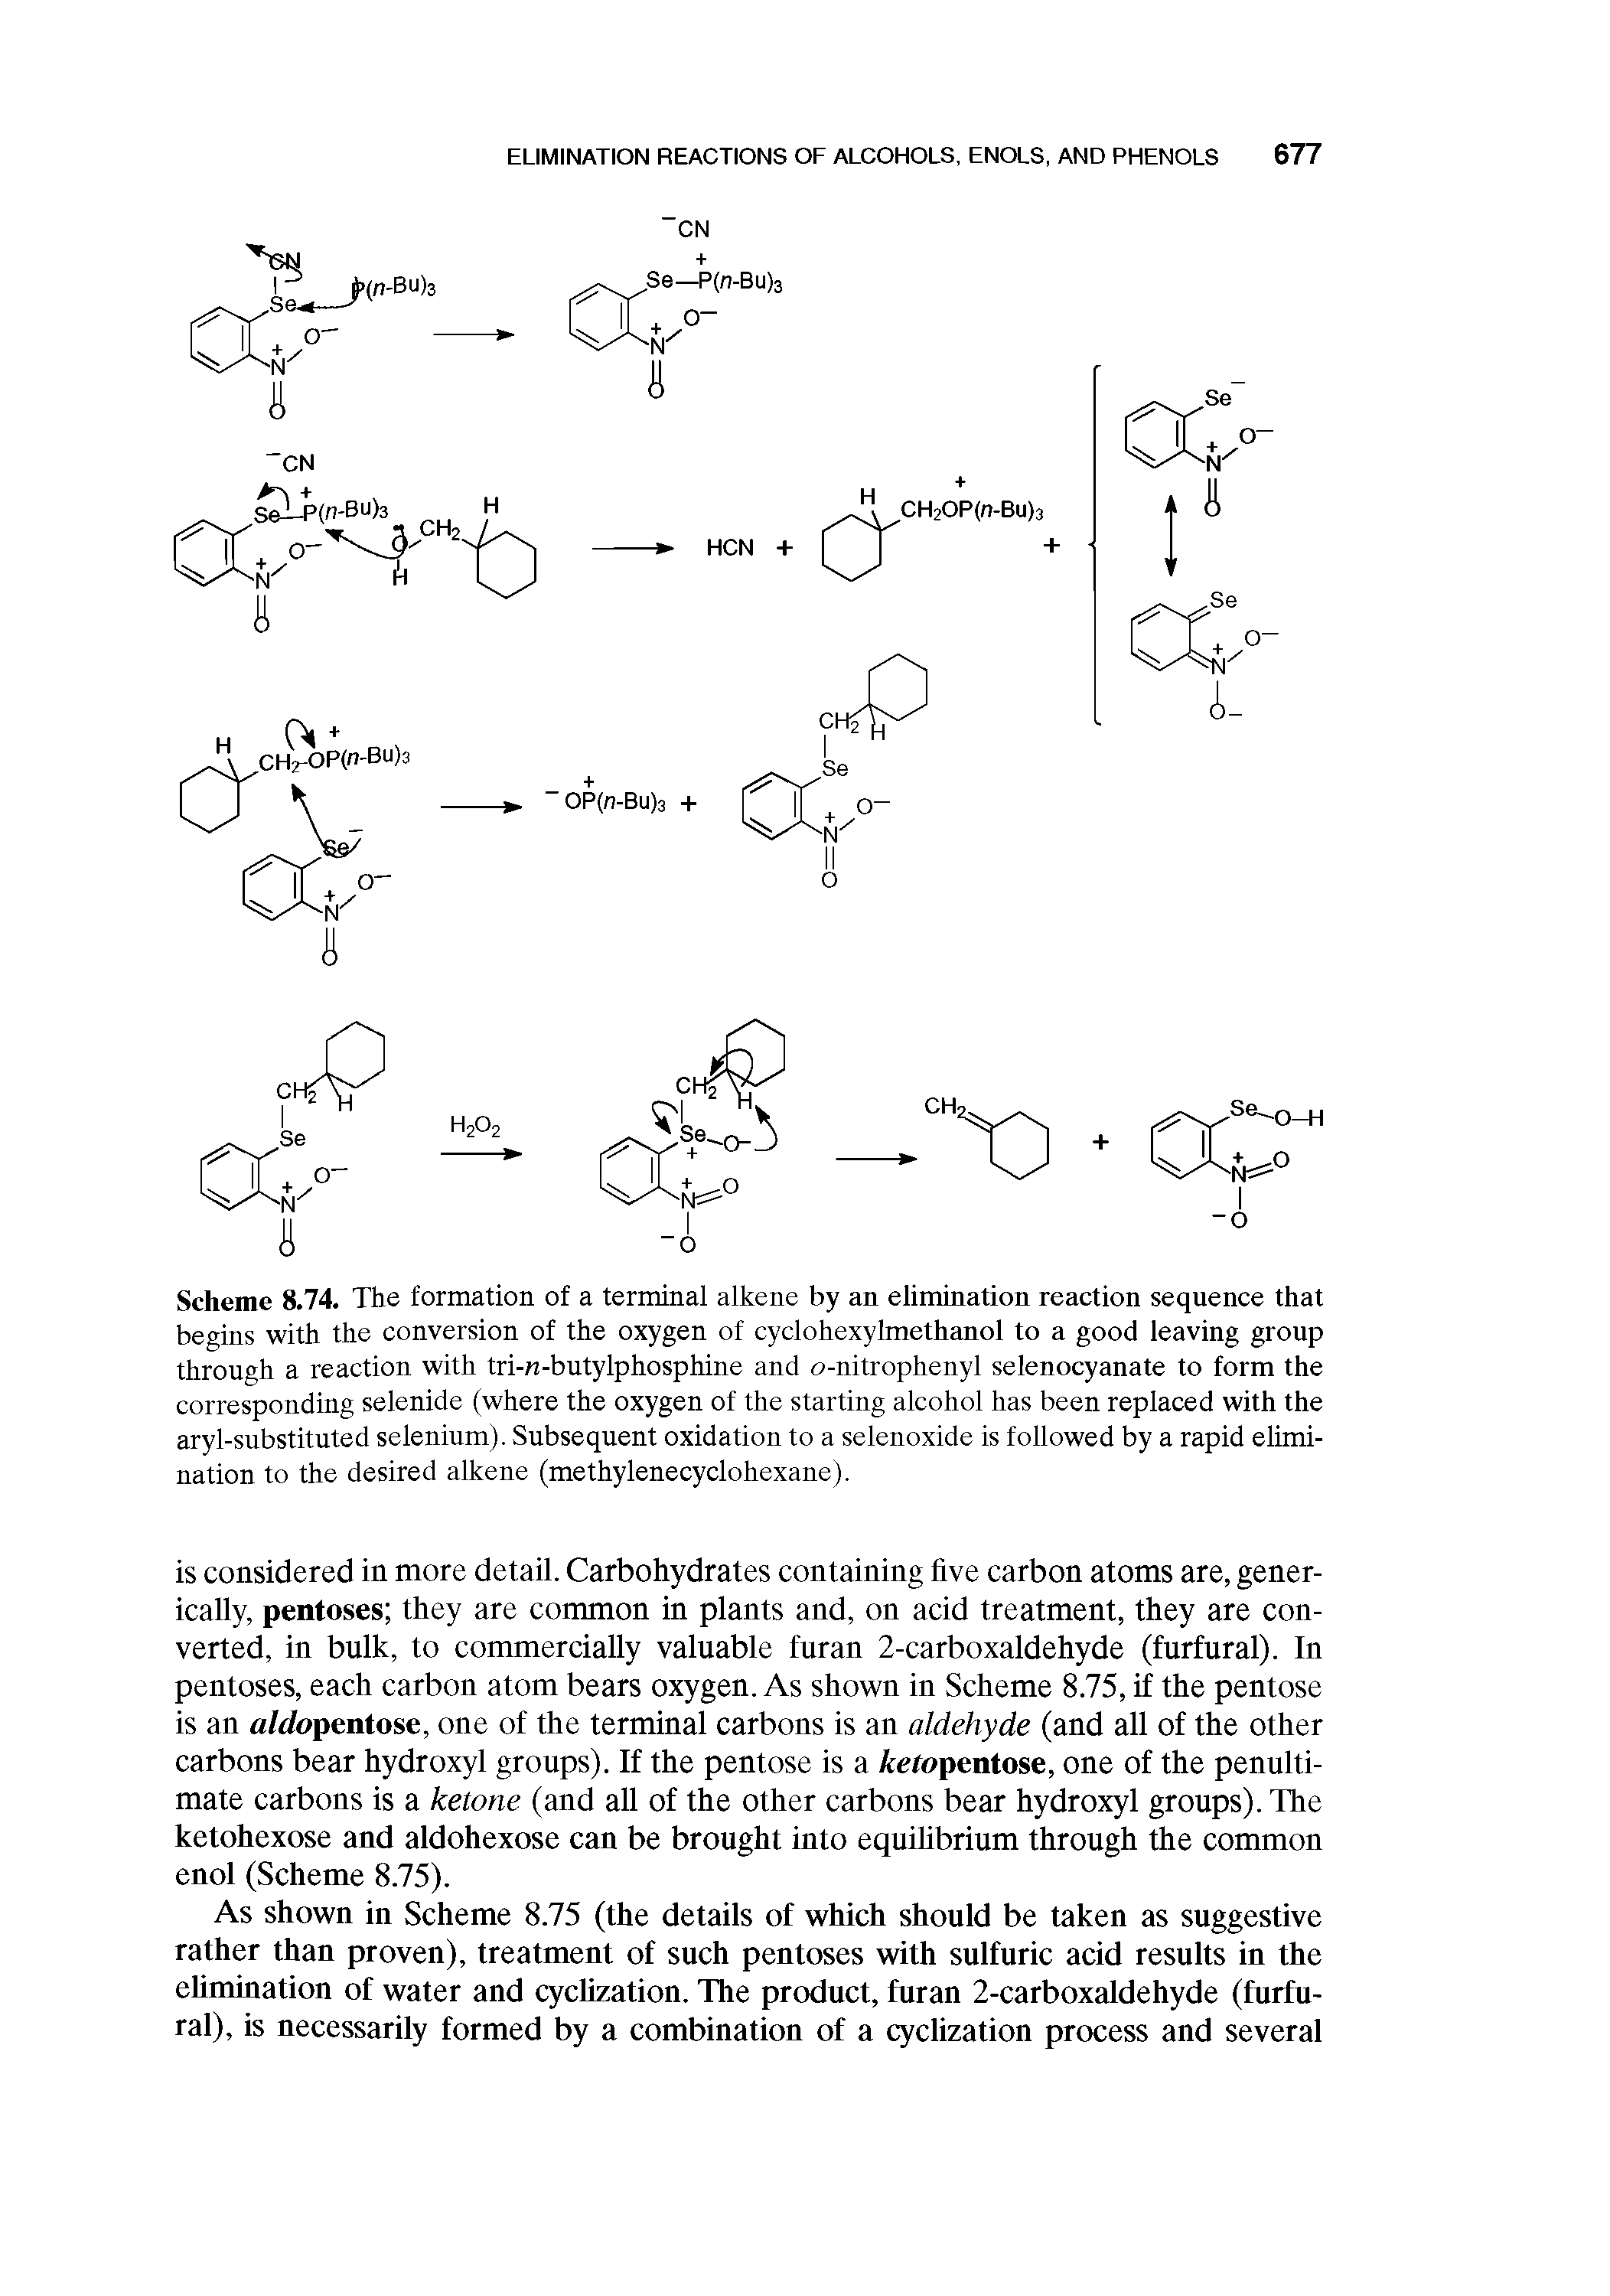 Scheme 8.74. The formation of a terminal alkene by an elimination reaction sequence that begins with the conversion of the oxygen of cyclohexylmethanol to a good leaving group through a reaction with tri- -butylphosphine and o-nitrophenyl selenocyanate to form the corresponding selenide (where the oxygen of the starting alcohol has been replaced with the aryl-substituted selenium). Subsequent oxidation to a selenoxide is followed by a rapid elimination to the desired alkene (methylenecyclohexane).